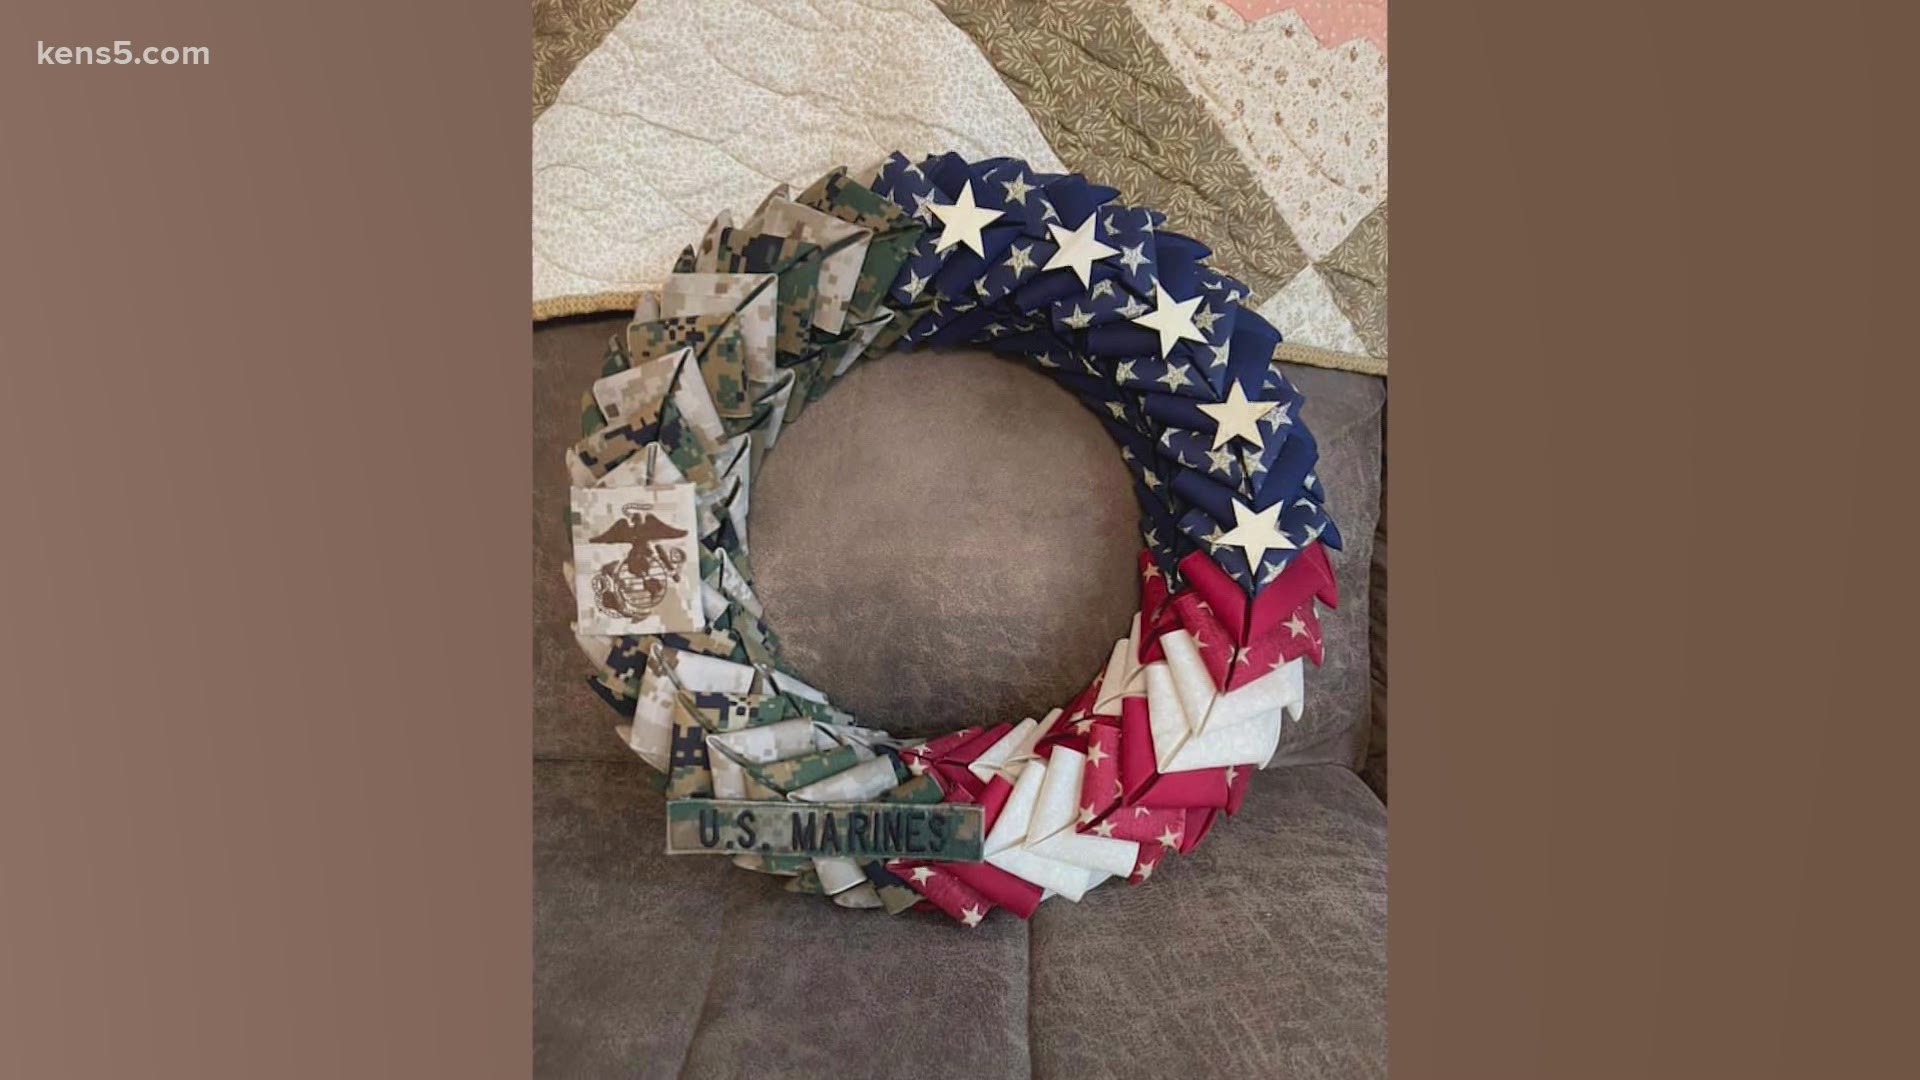 A local airman is getting crafty this holiday season – making military wreaths as a side business.